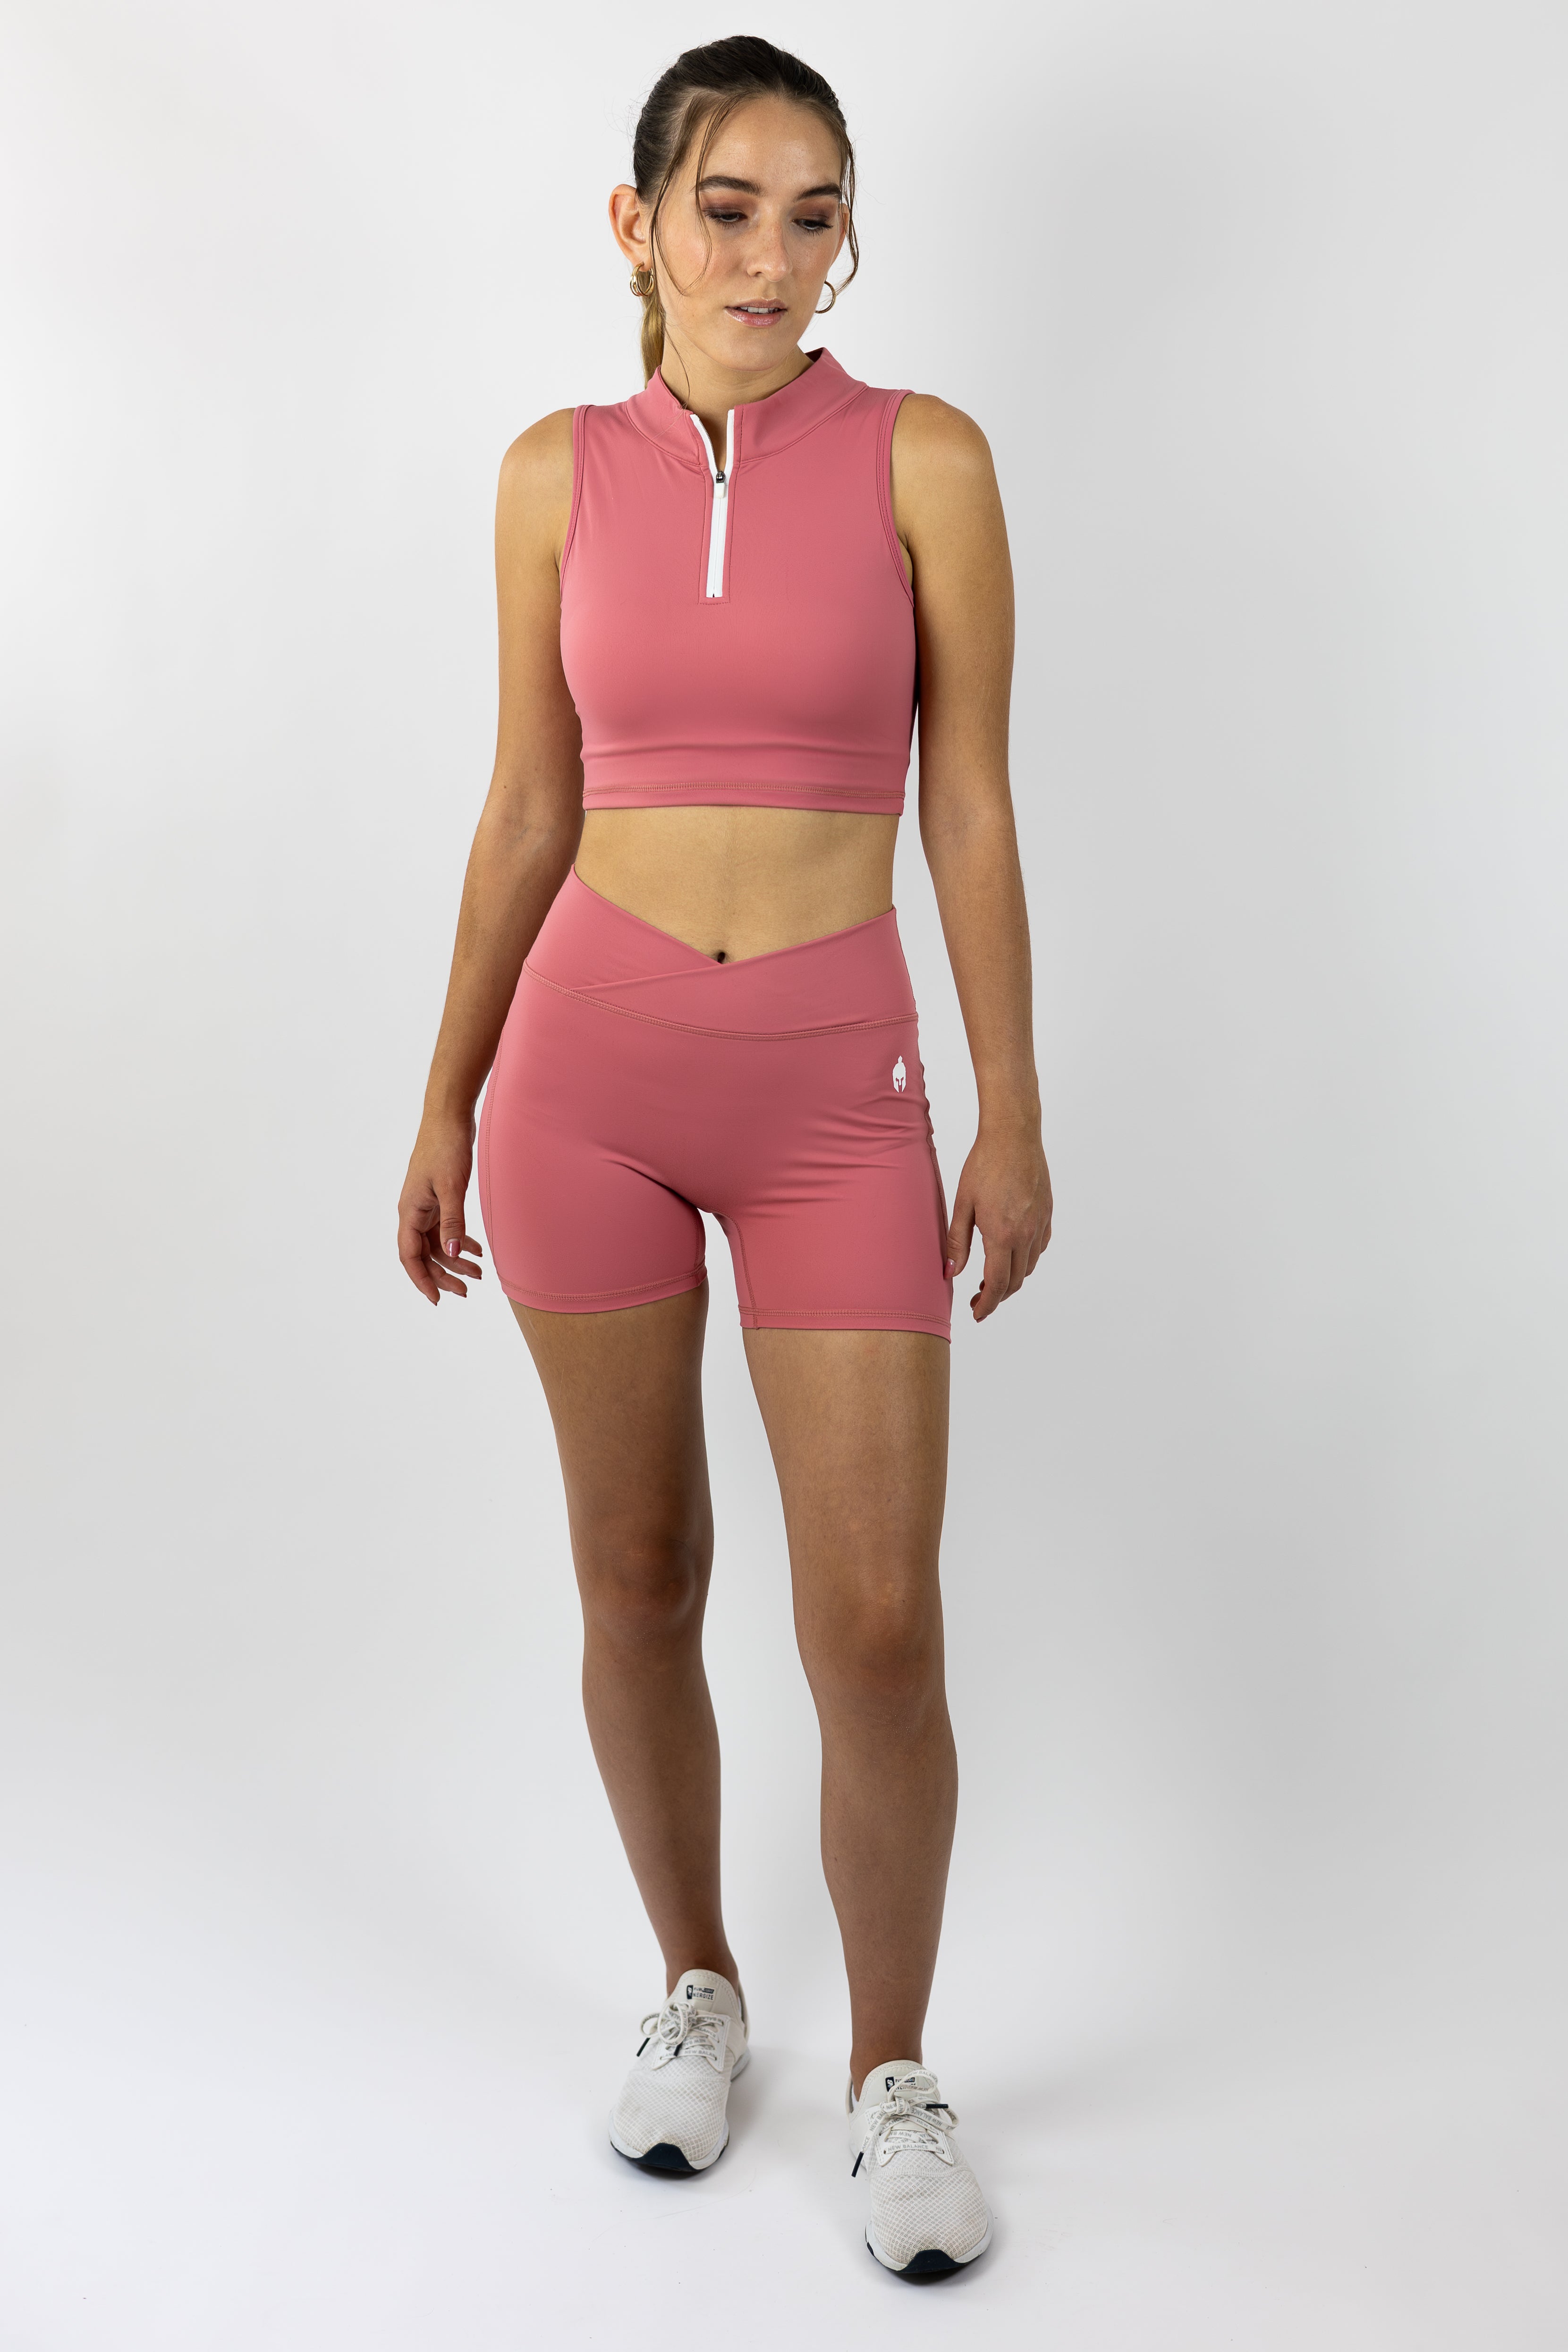 Woman modeling medium pink collared Strength of One gym wear top with white 3/4 zipper and medium pink tight gym wear shorts with cross over top band